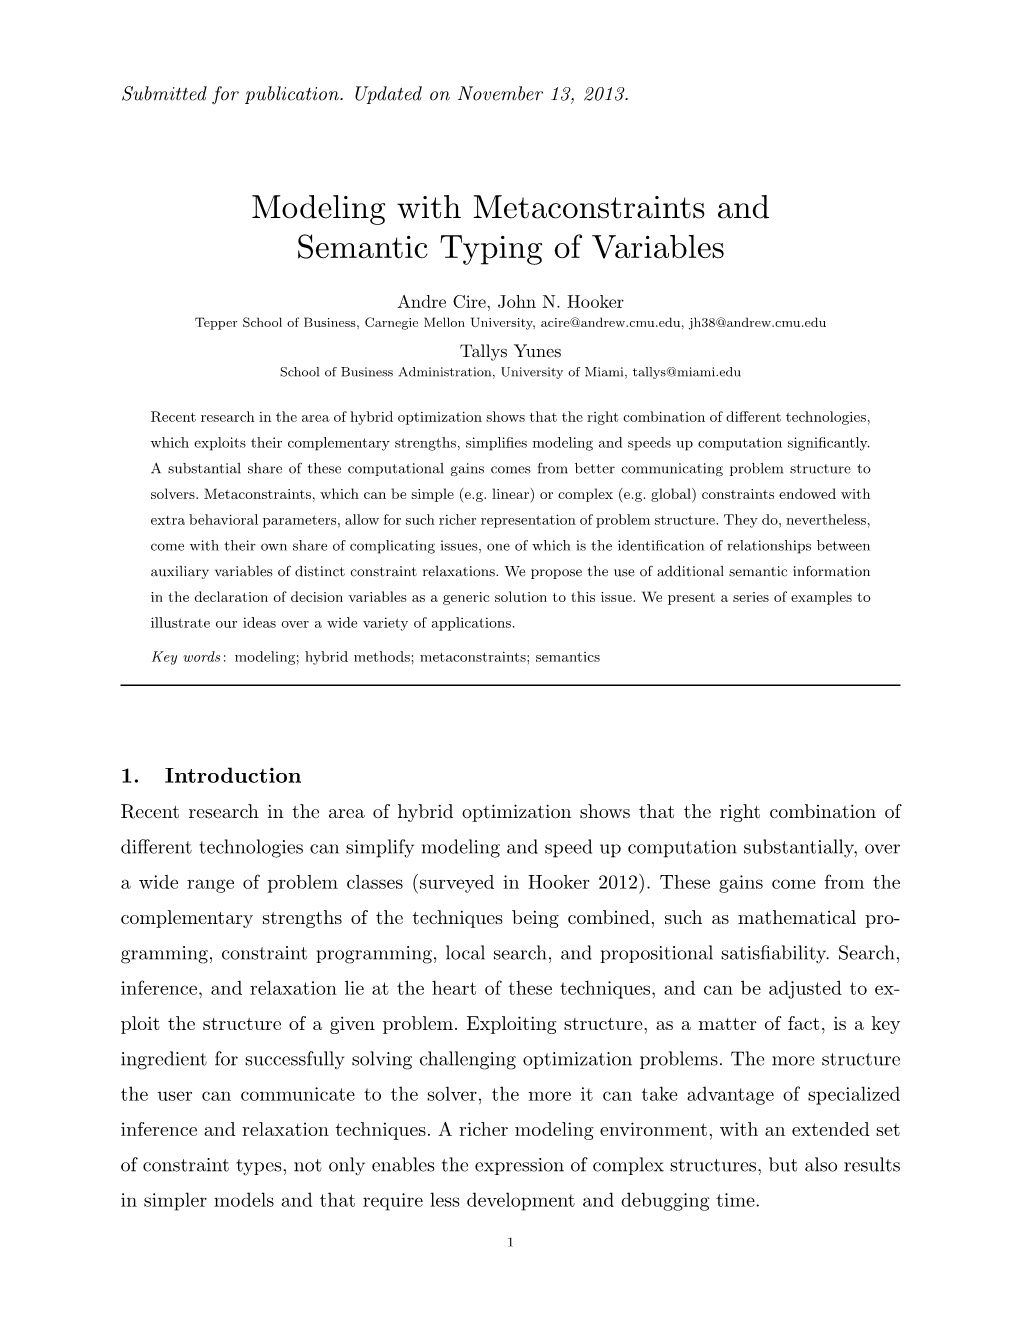 Modeling with Metaconstraints and Semantic Typing of Variables